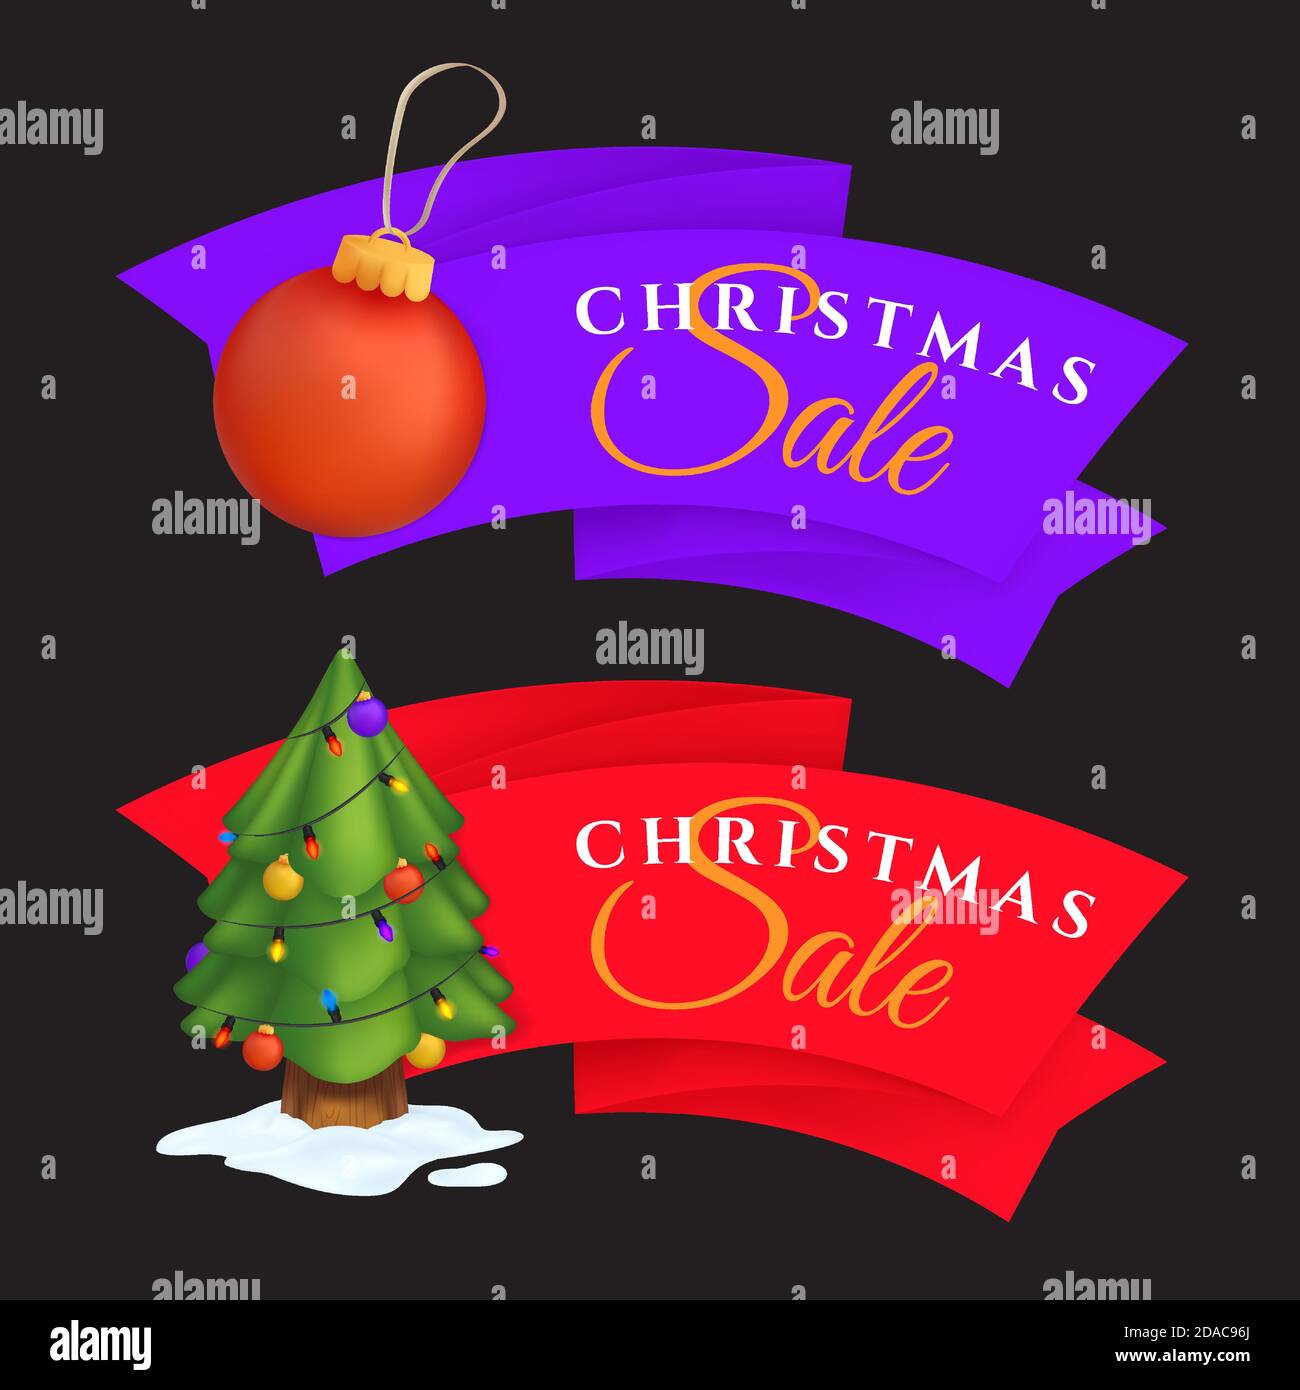 Christmas sale labels set with decorated evergreen tree and red decoration ball. Vector illustration of colorful festive tags or special offer banners Stock Vector